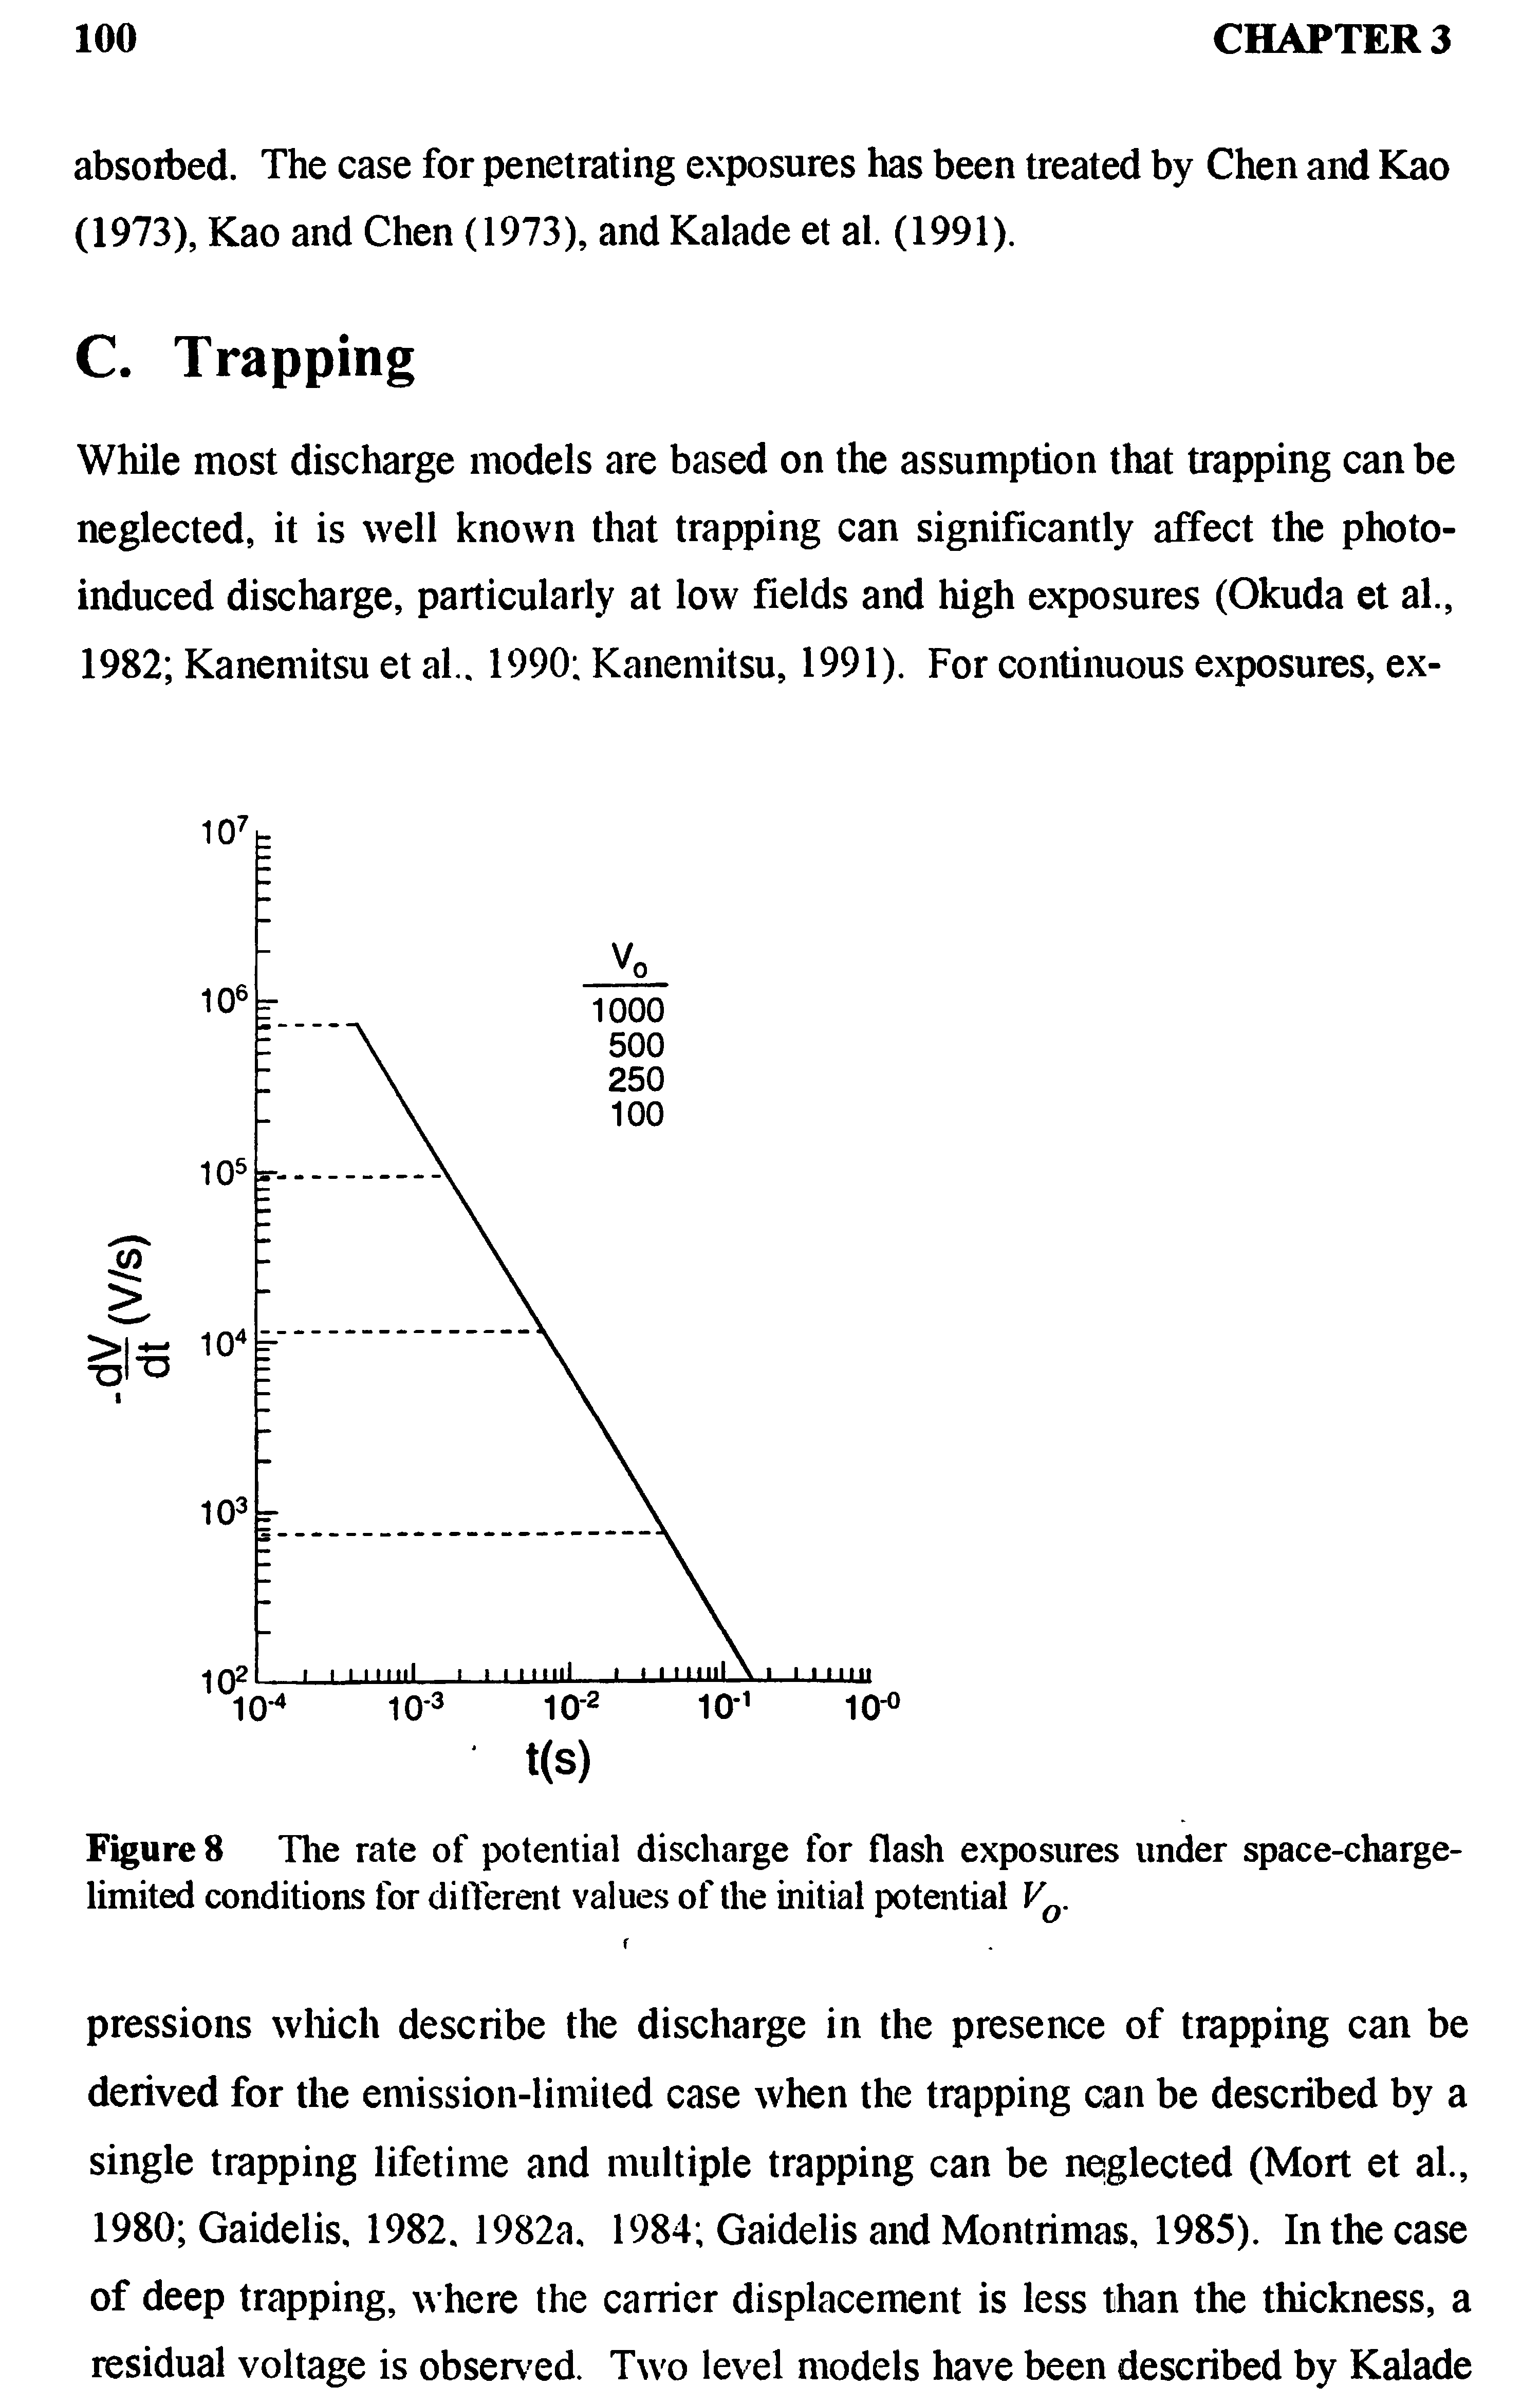 Figure 8 The rate of potential discharge for flash exposures under space-charge-limited conditions for different values of the initial potential VQ.